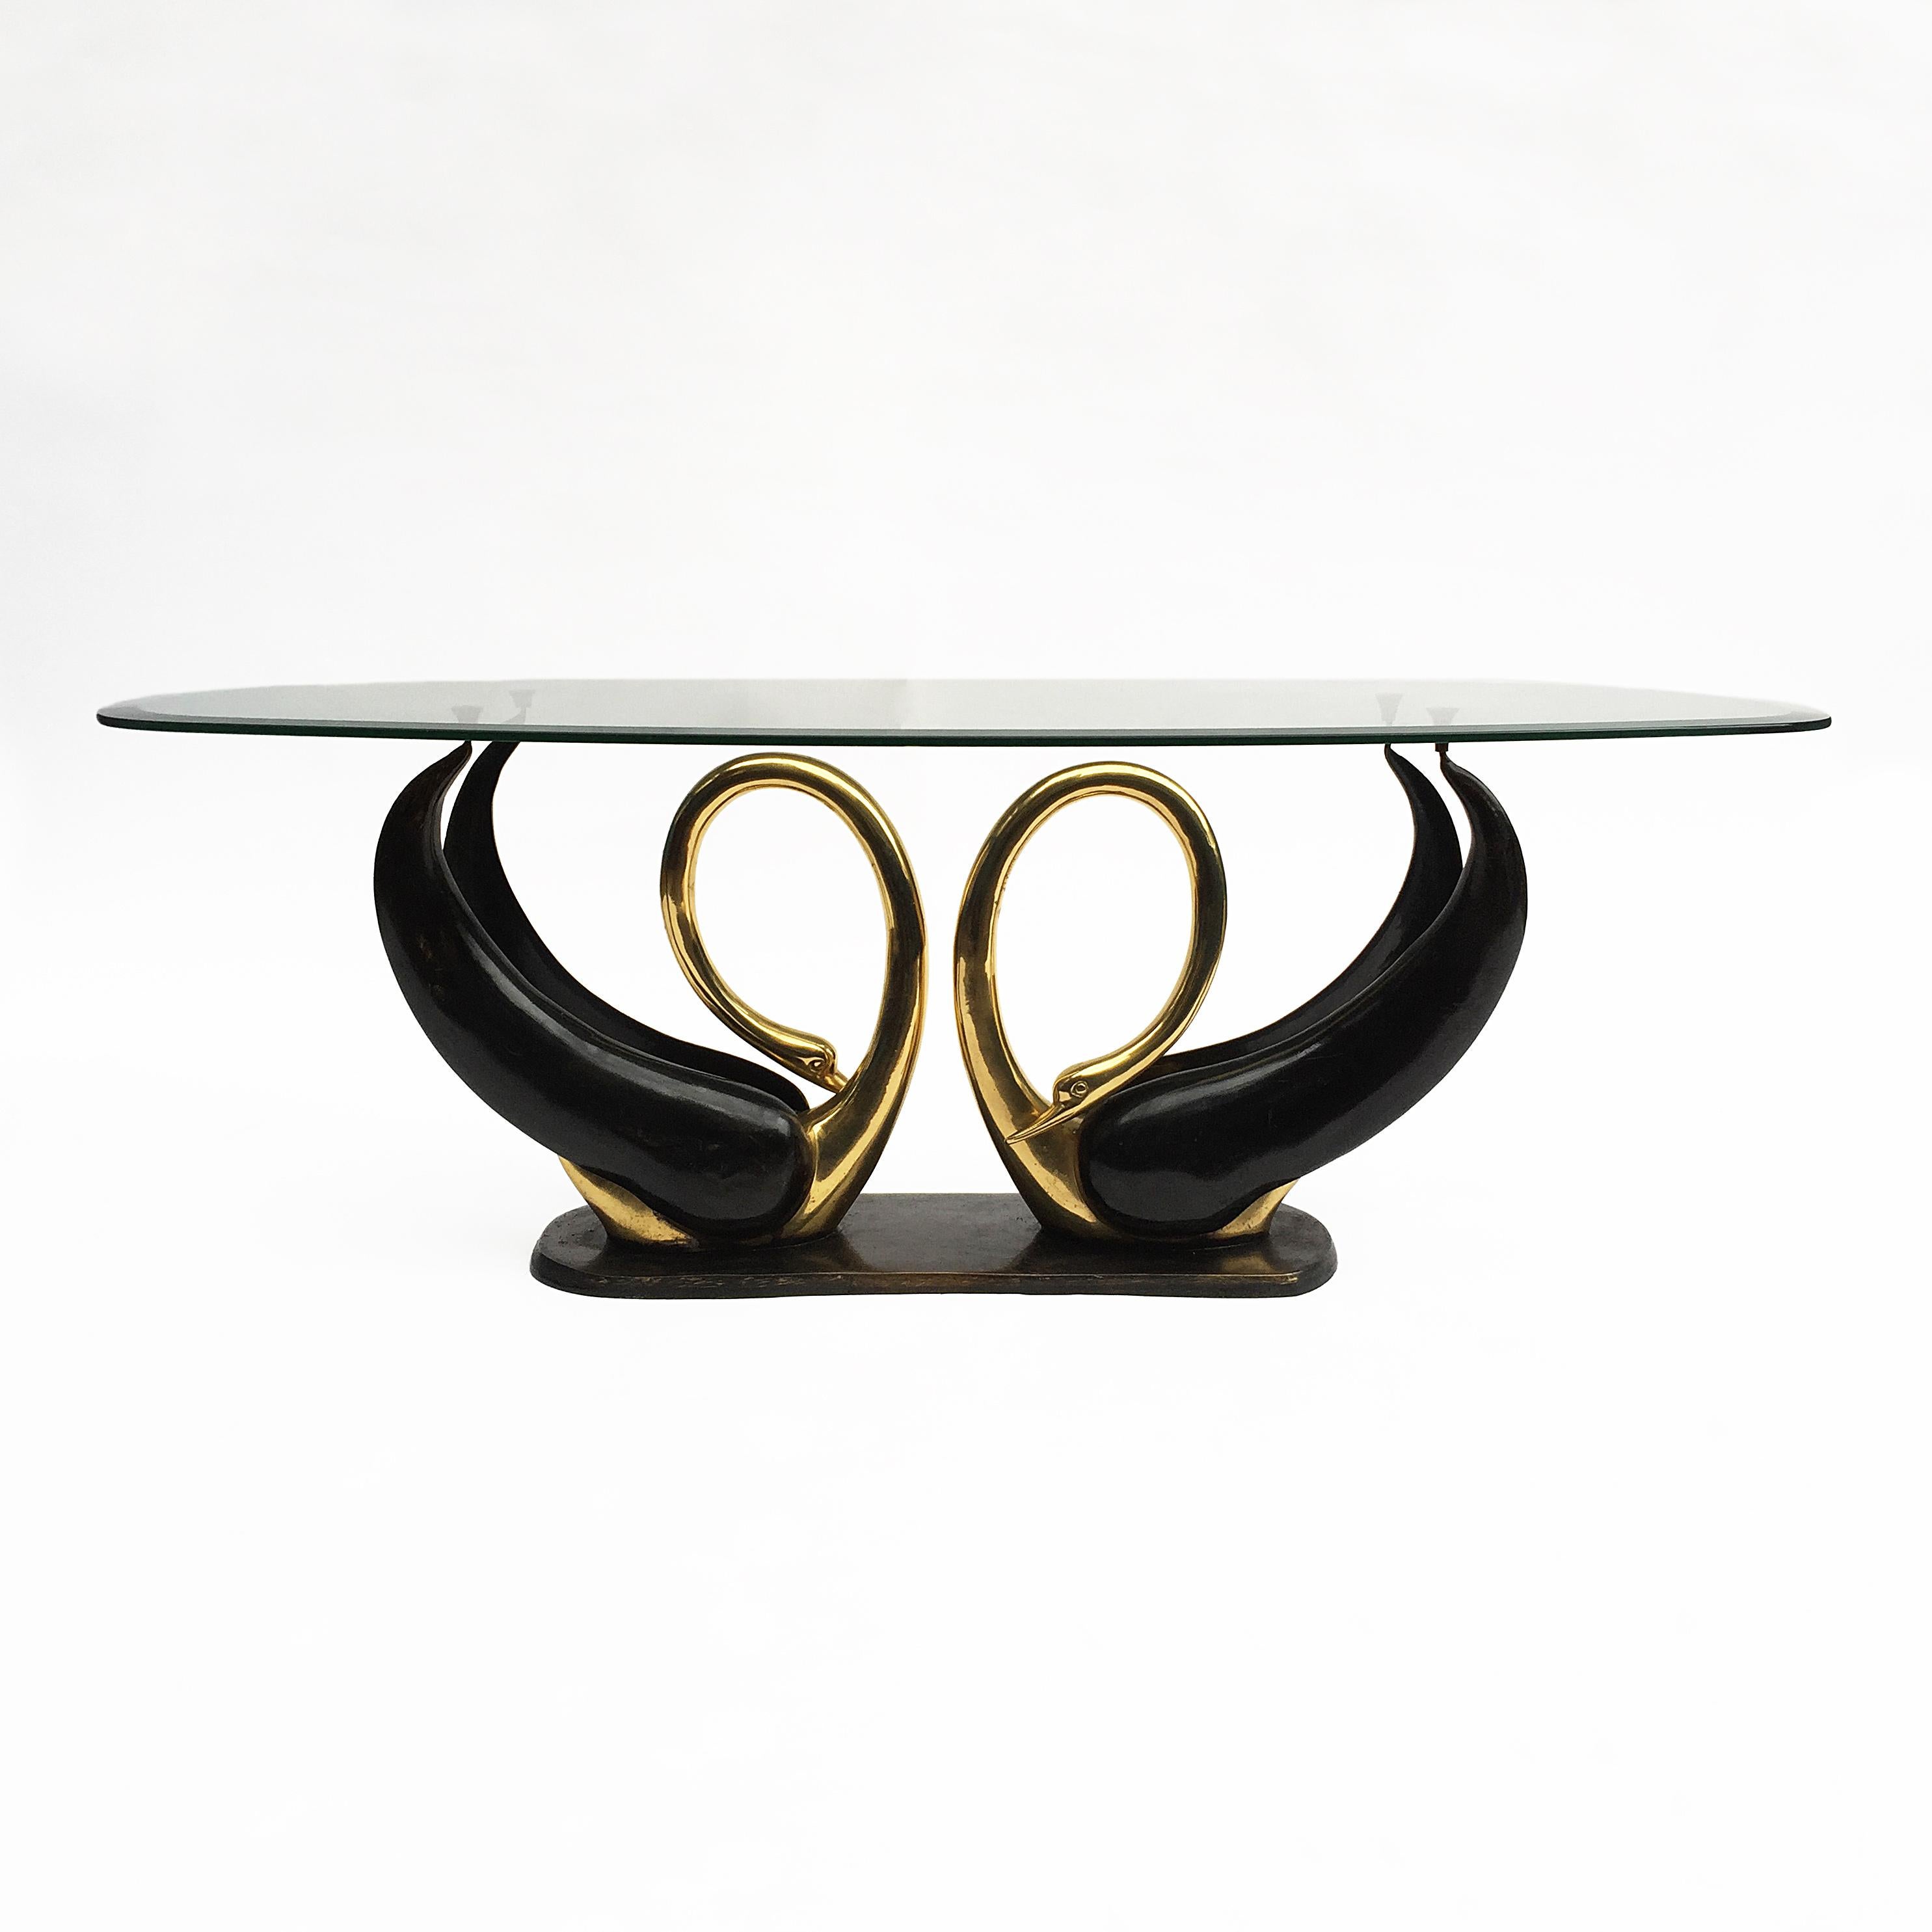 A beautiful love swans brass sculptured coffee table by Maison Jansen. Part of the body and brass base is black patinated and the rest polished brass. Amazing Hollywood Regency statement piece with a large rounded beveled glass top.
    